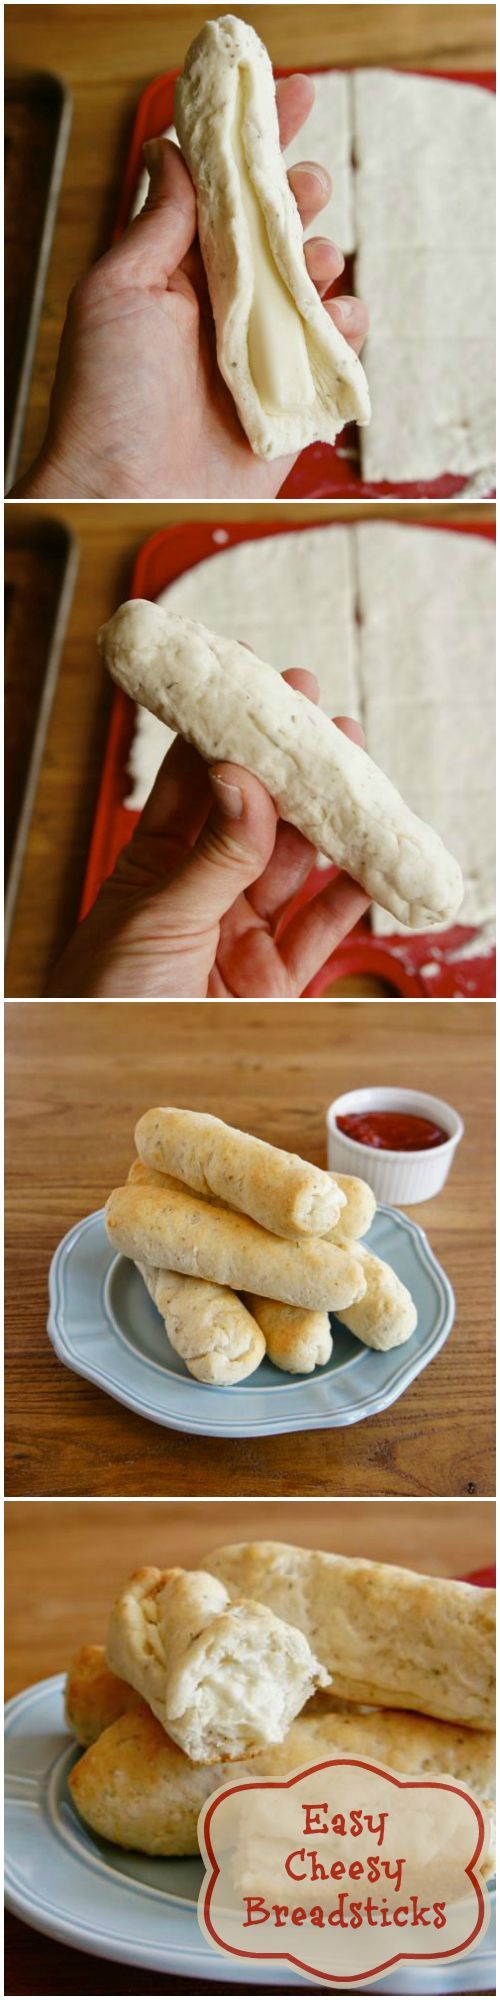 These cheese stuffed #breadsticks using #Bisquick and #cheese sticks are almost as fun to make as they are to eat! by